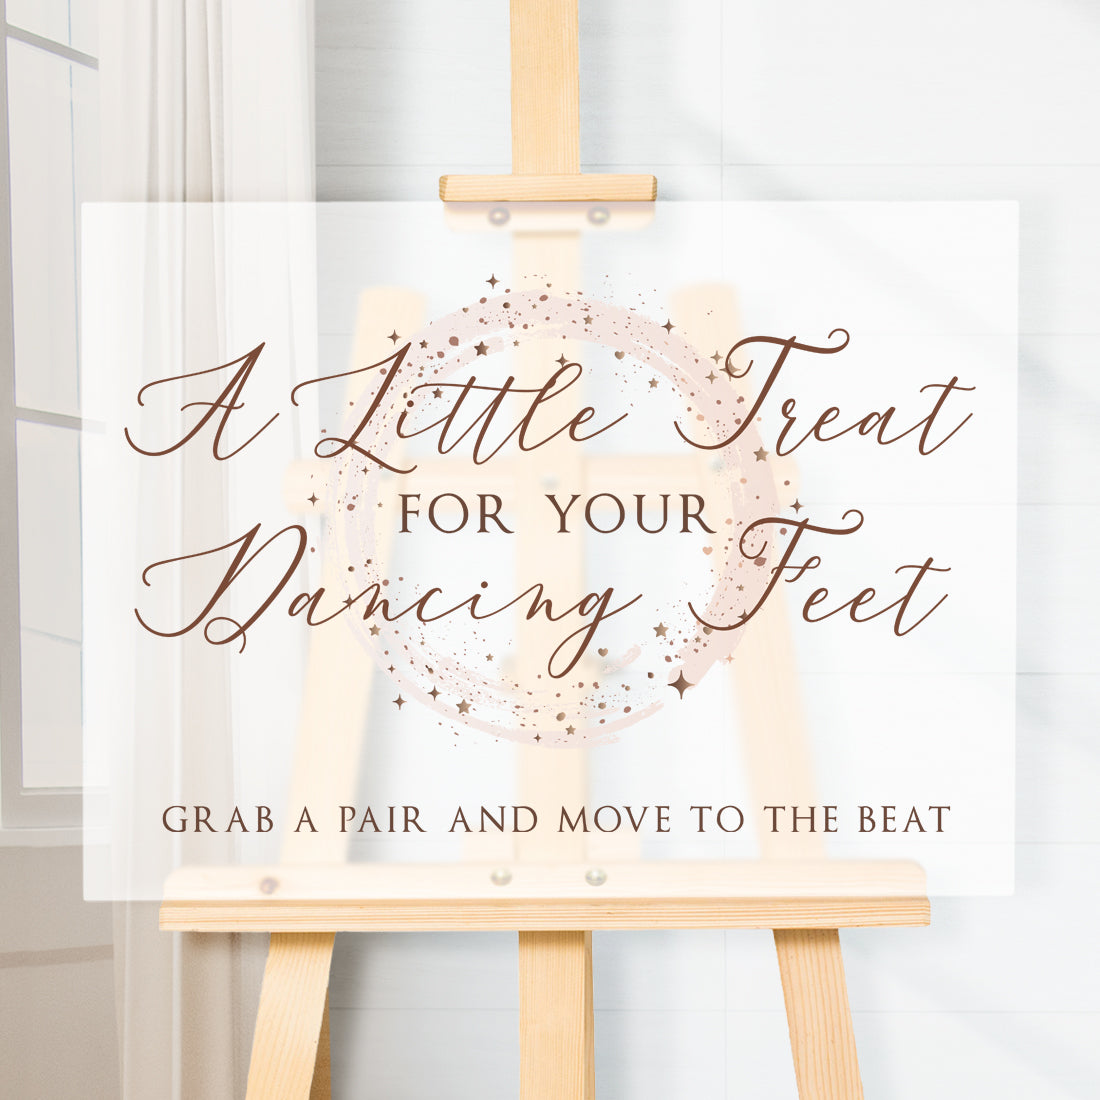 Sparkly Circle Treat For Your Feet Flip Flop Wedding Sign-Weddings by Lumi